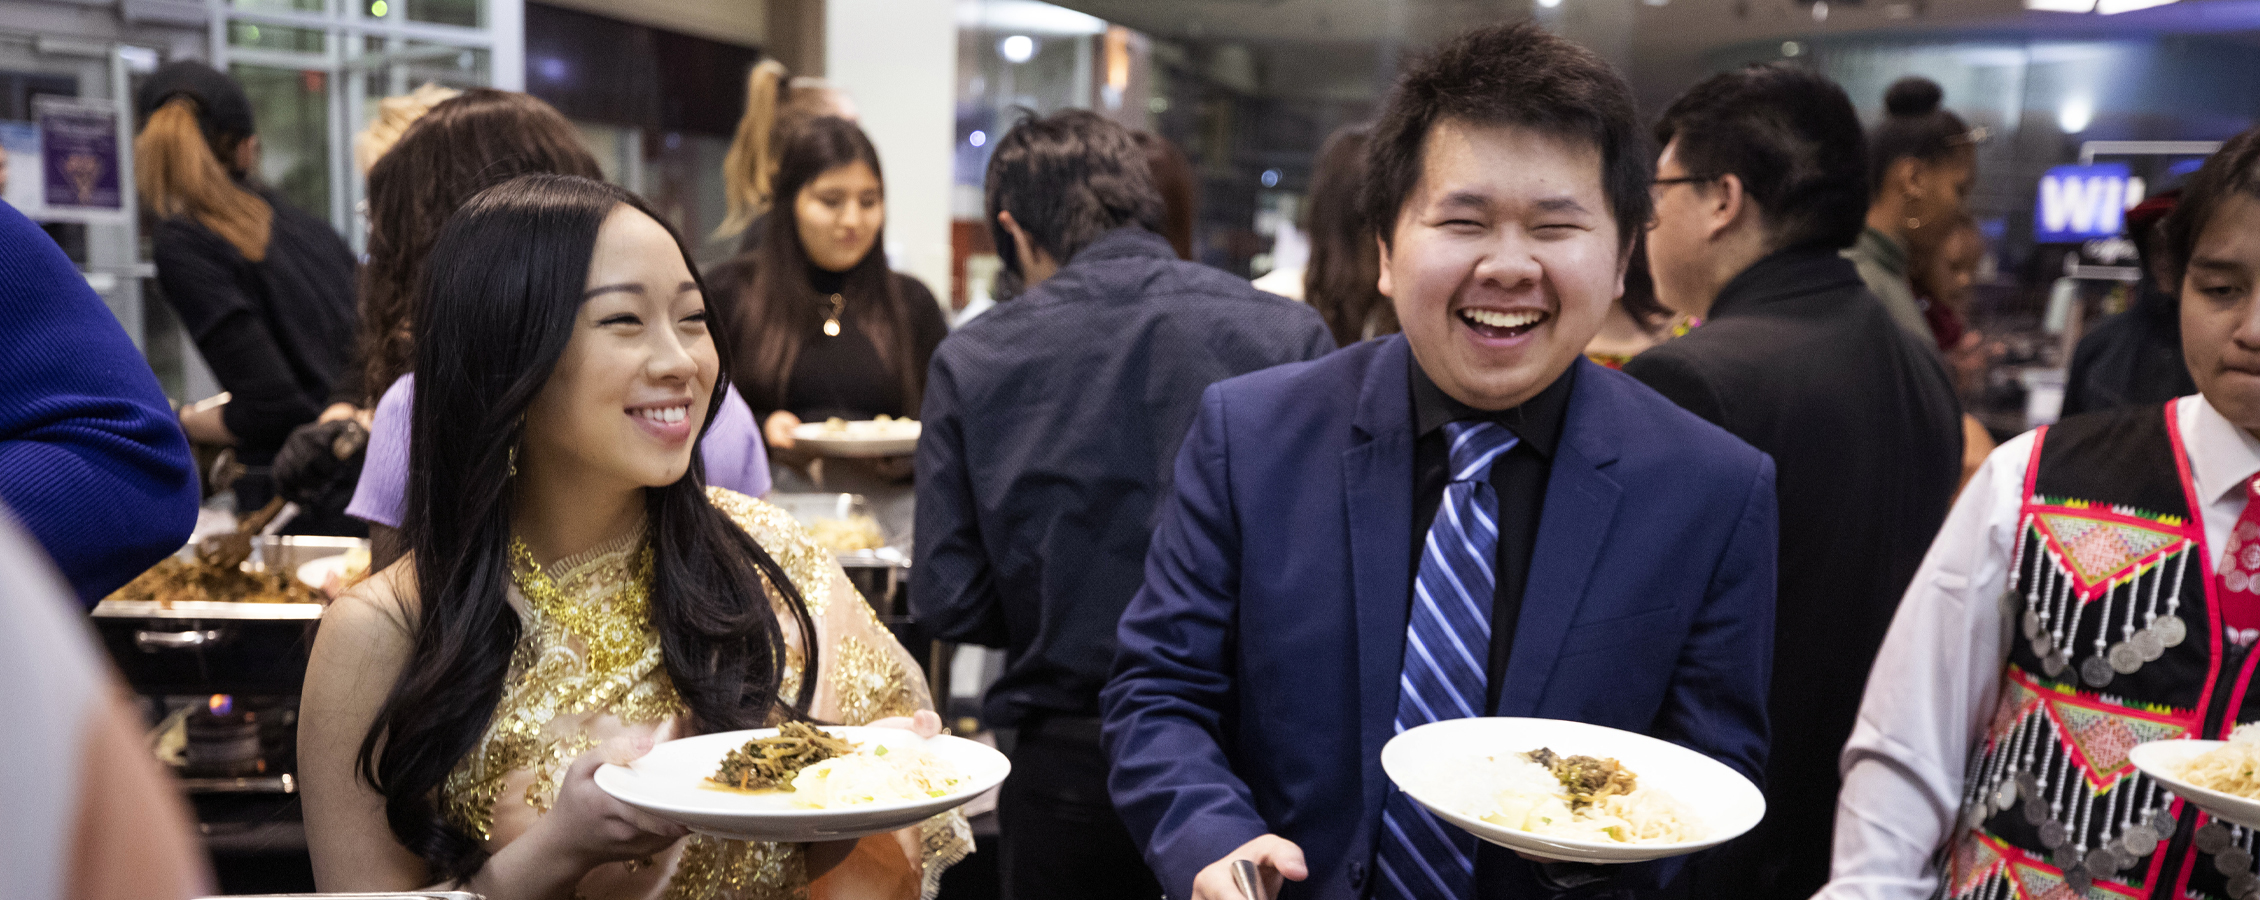 Two students smile with plates of food in their hands.